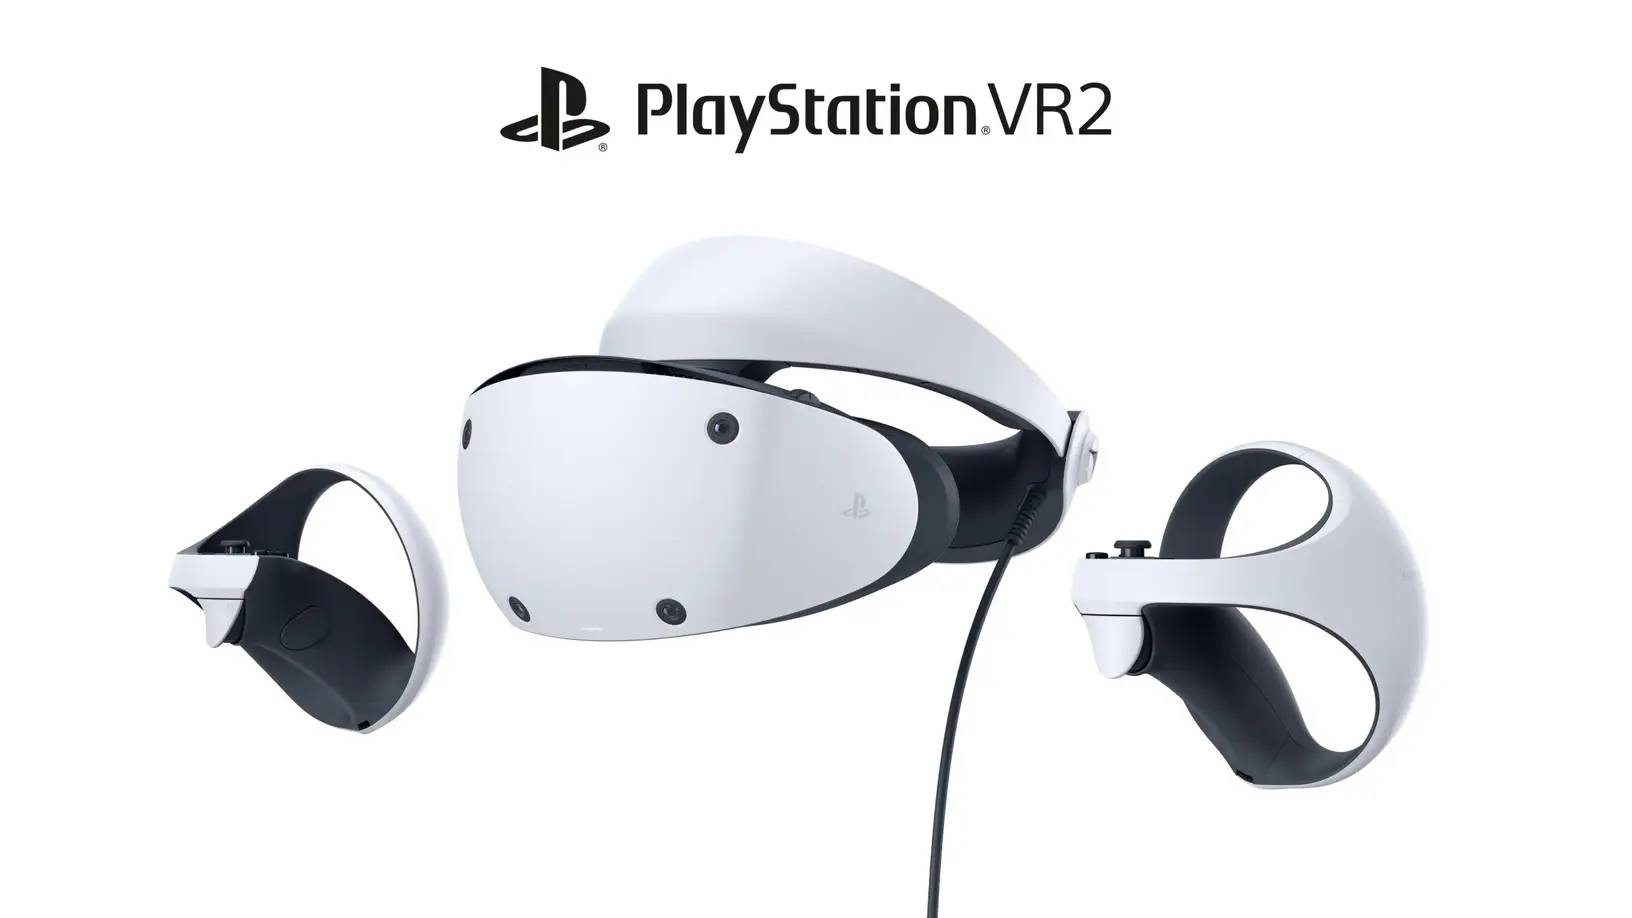 Design of the PSVR 2 headset and controllers